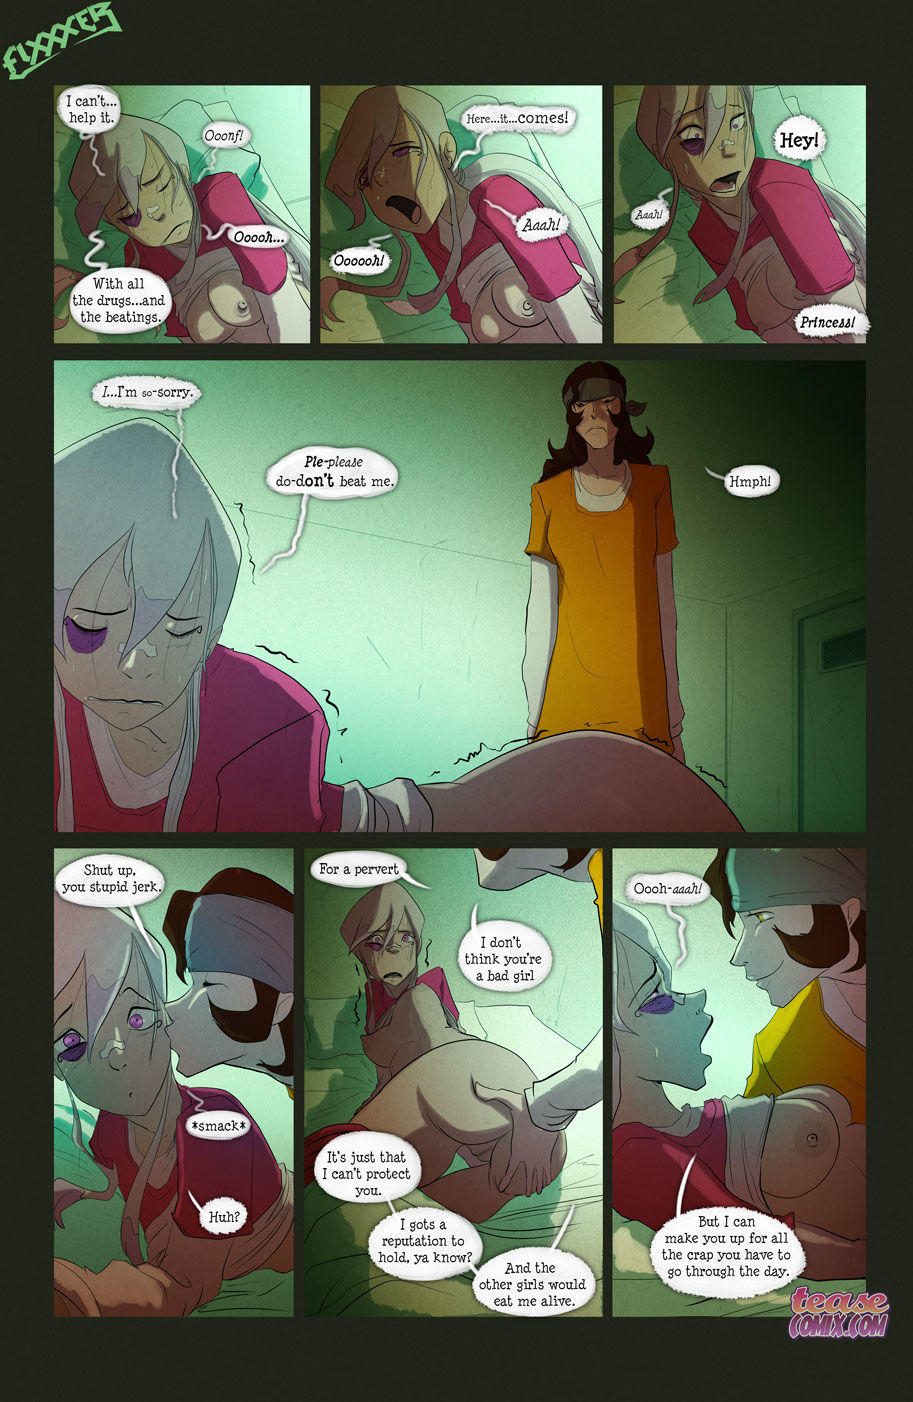 Fixxxer - The witch with no name, Ben 10 page 25